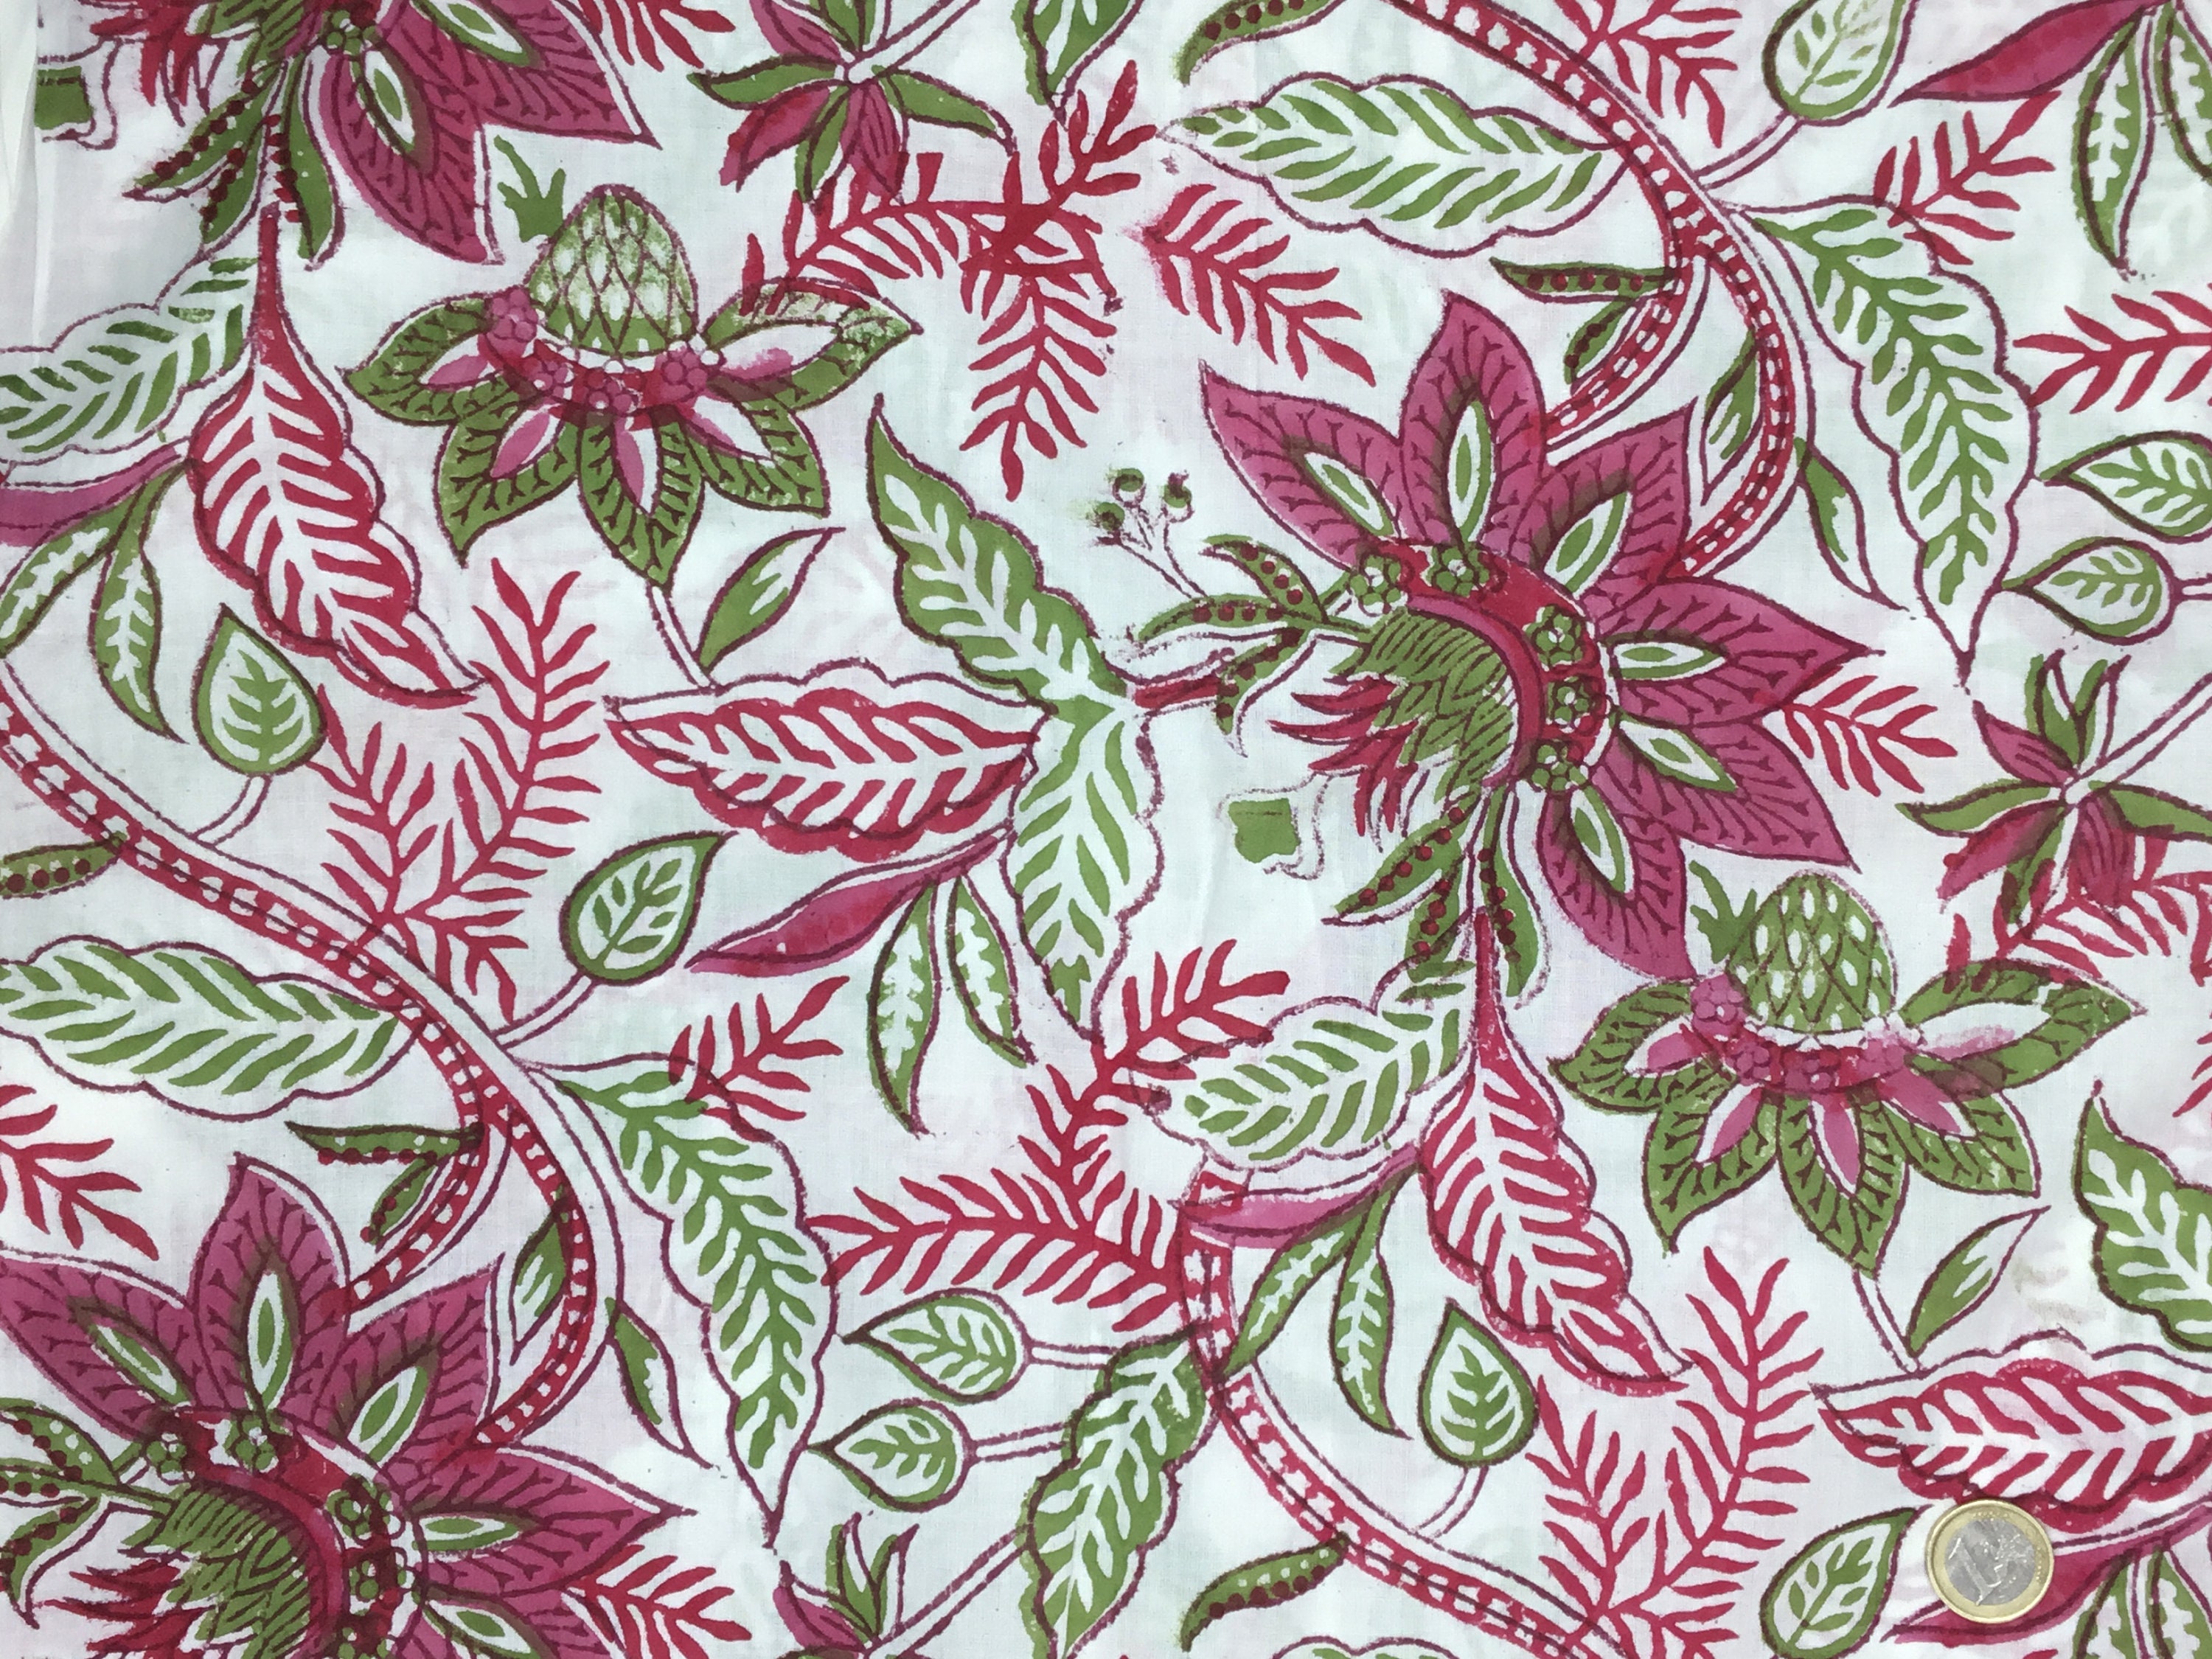 Hand painted Indian cotton fabric